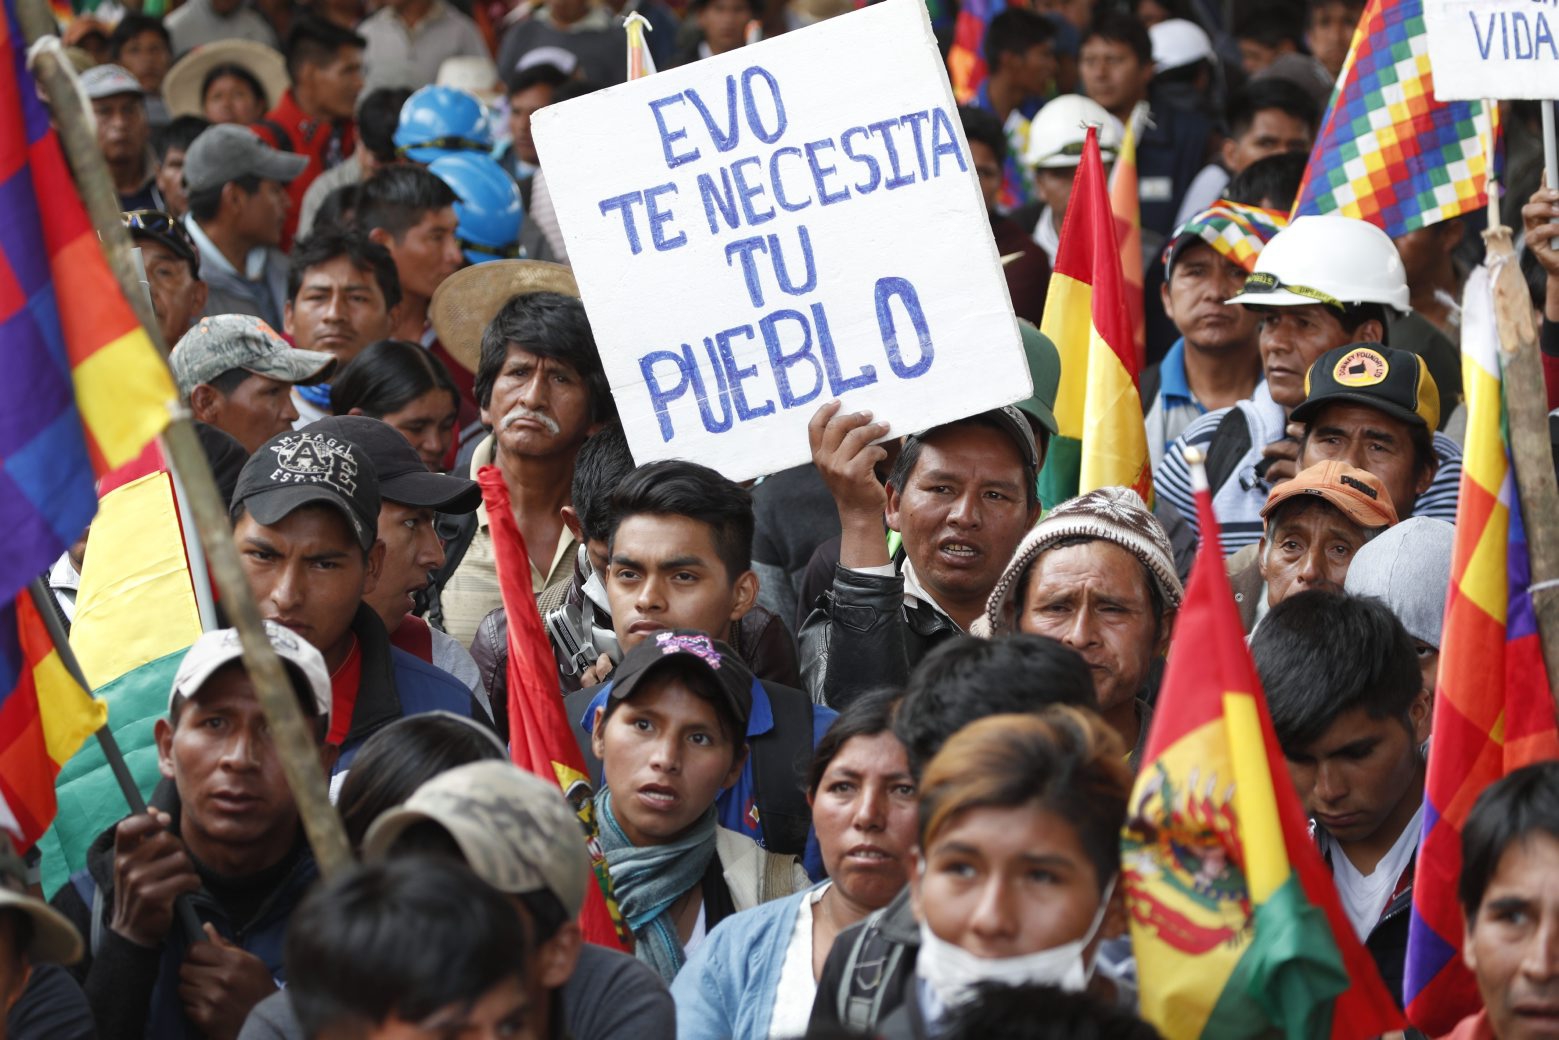 A man holds a sign with a message that reads in Spanish: "Evo, your people need you," as coca leaf producers, supporters of former President Evo Morales, gather to march to Cochabamba from Sacaba, Bolivia, Friday, Nov. 15, 2019. Evo Morales, BoliviaÄôs first indigenous president, resigned on Sunday at military prompting, following massive nationwide protests over suspected vote-rigging in an Oct. 20 election in which he claimed to have won a fourth term in office. An Organization of American States audit of the vote found widespread irregularities. (AP Photo/Juan Karita) Bolivia Protests